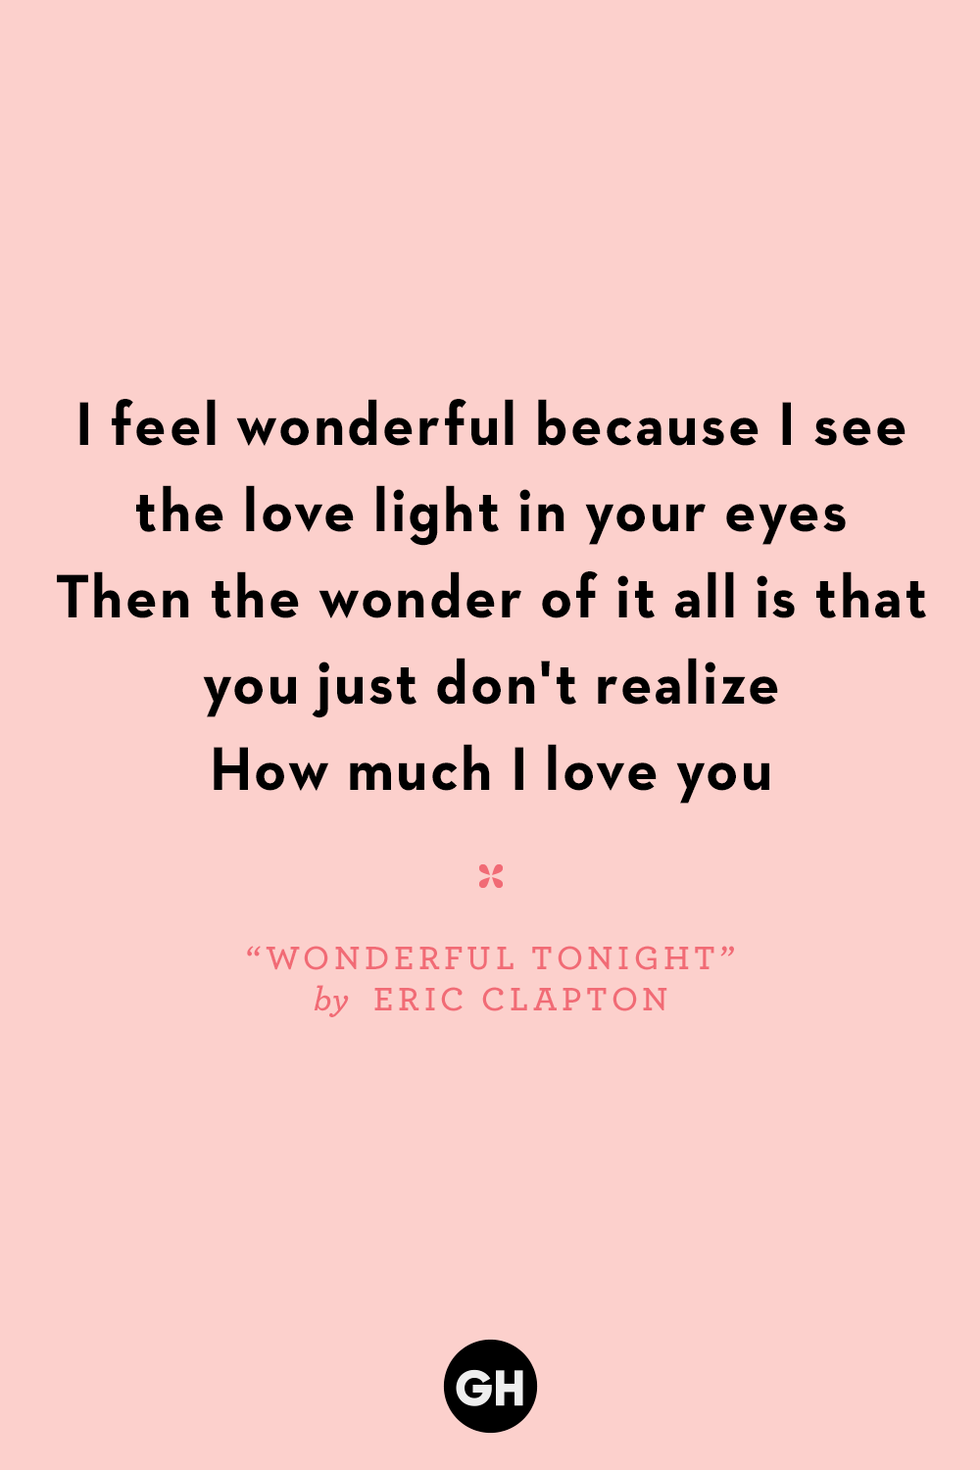 72 Best Romantic Love Song Lyrics & Quotes Of All Time